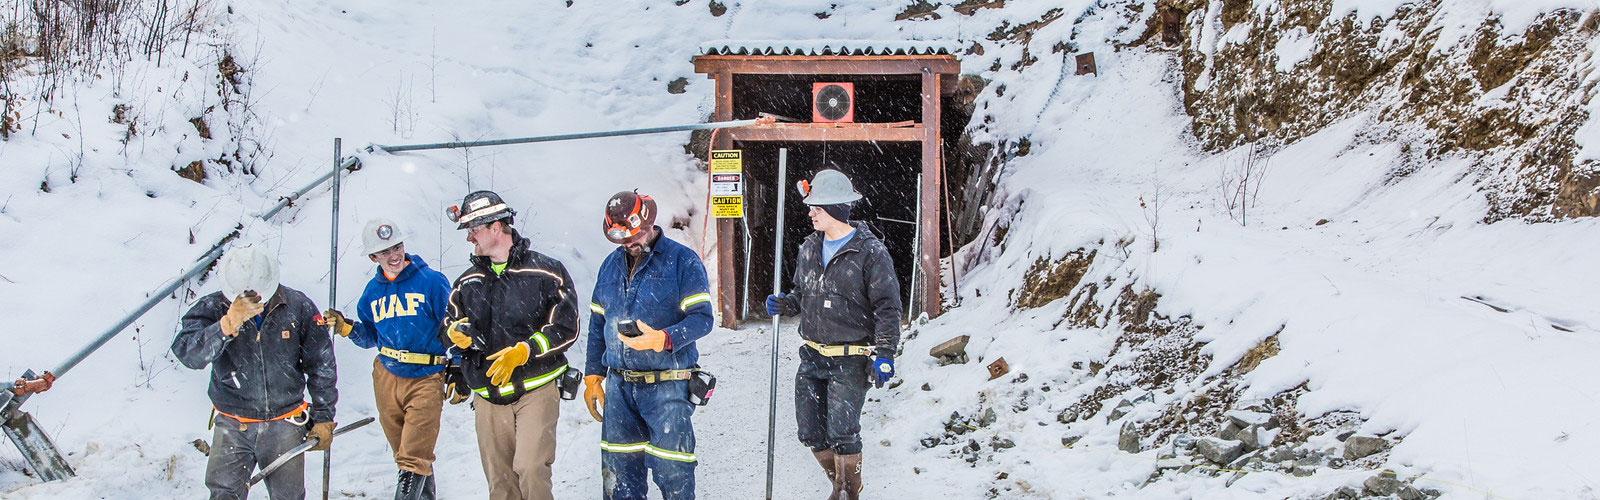 People exiting Silver Fox mine.